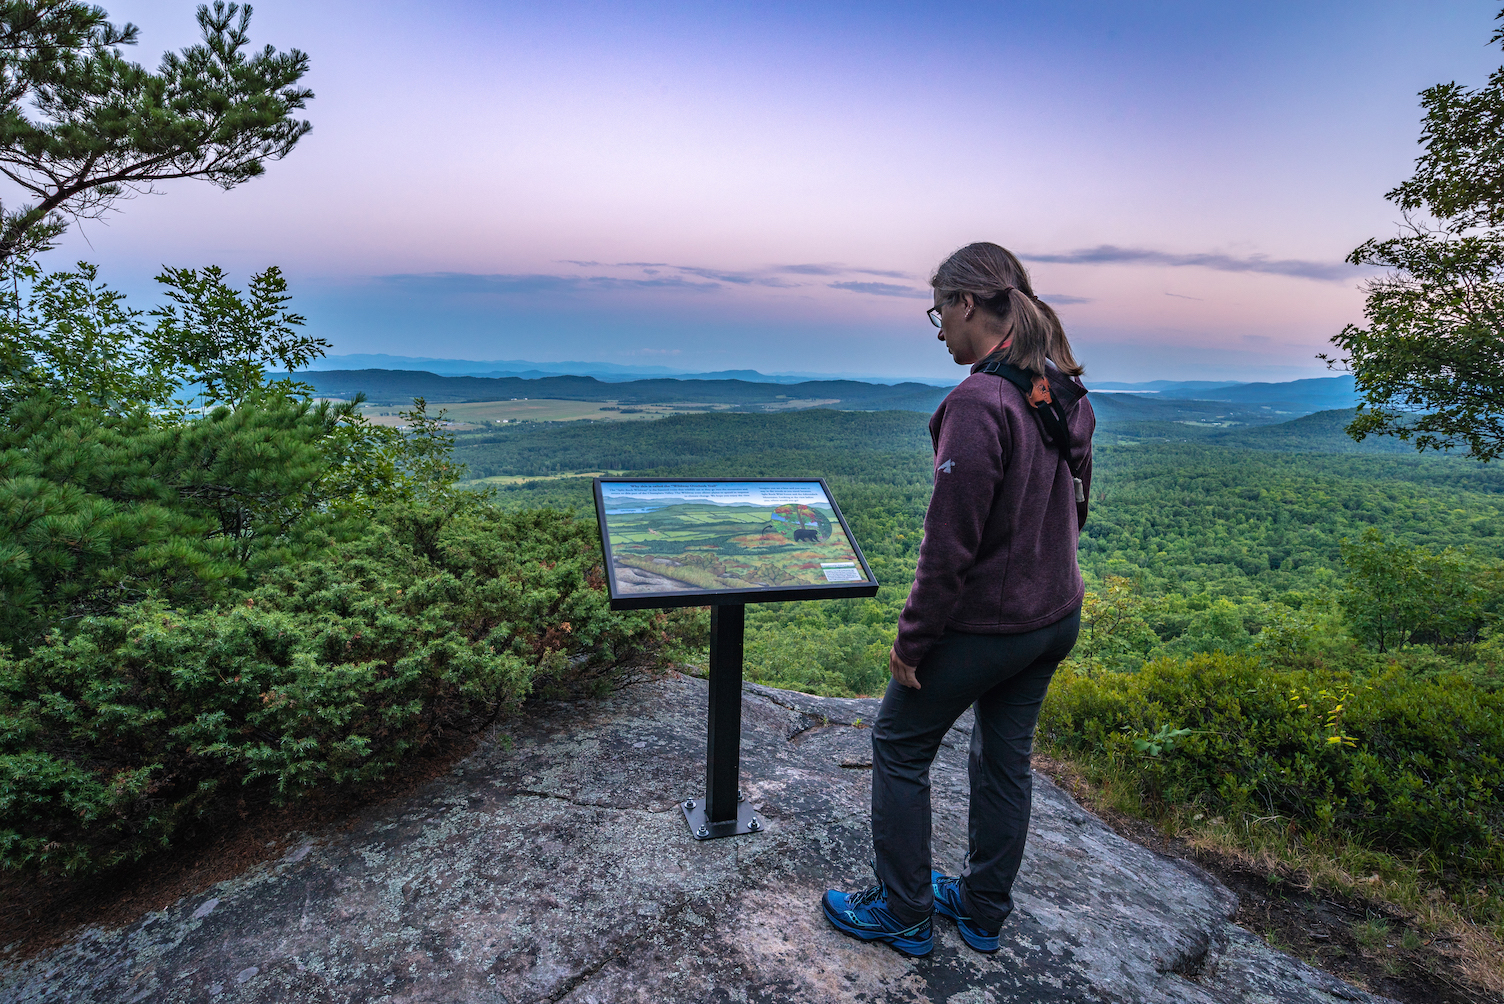 A CATS Trail Makes ﻿Top 10 ADK Hike List